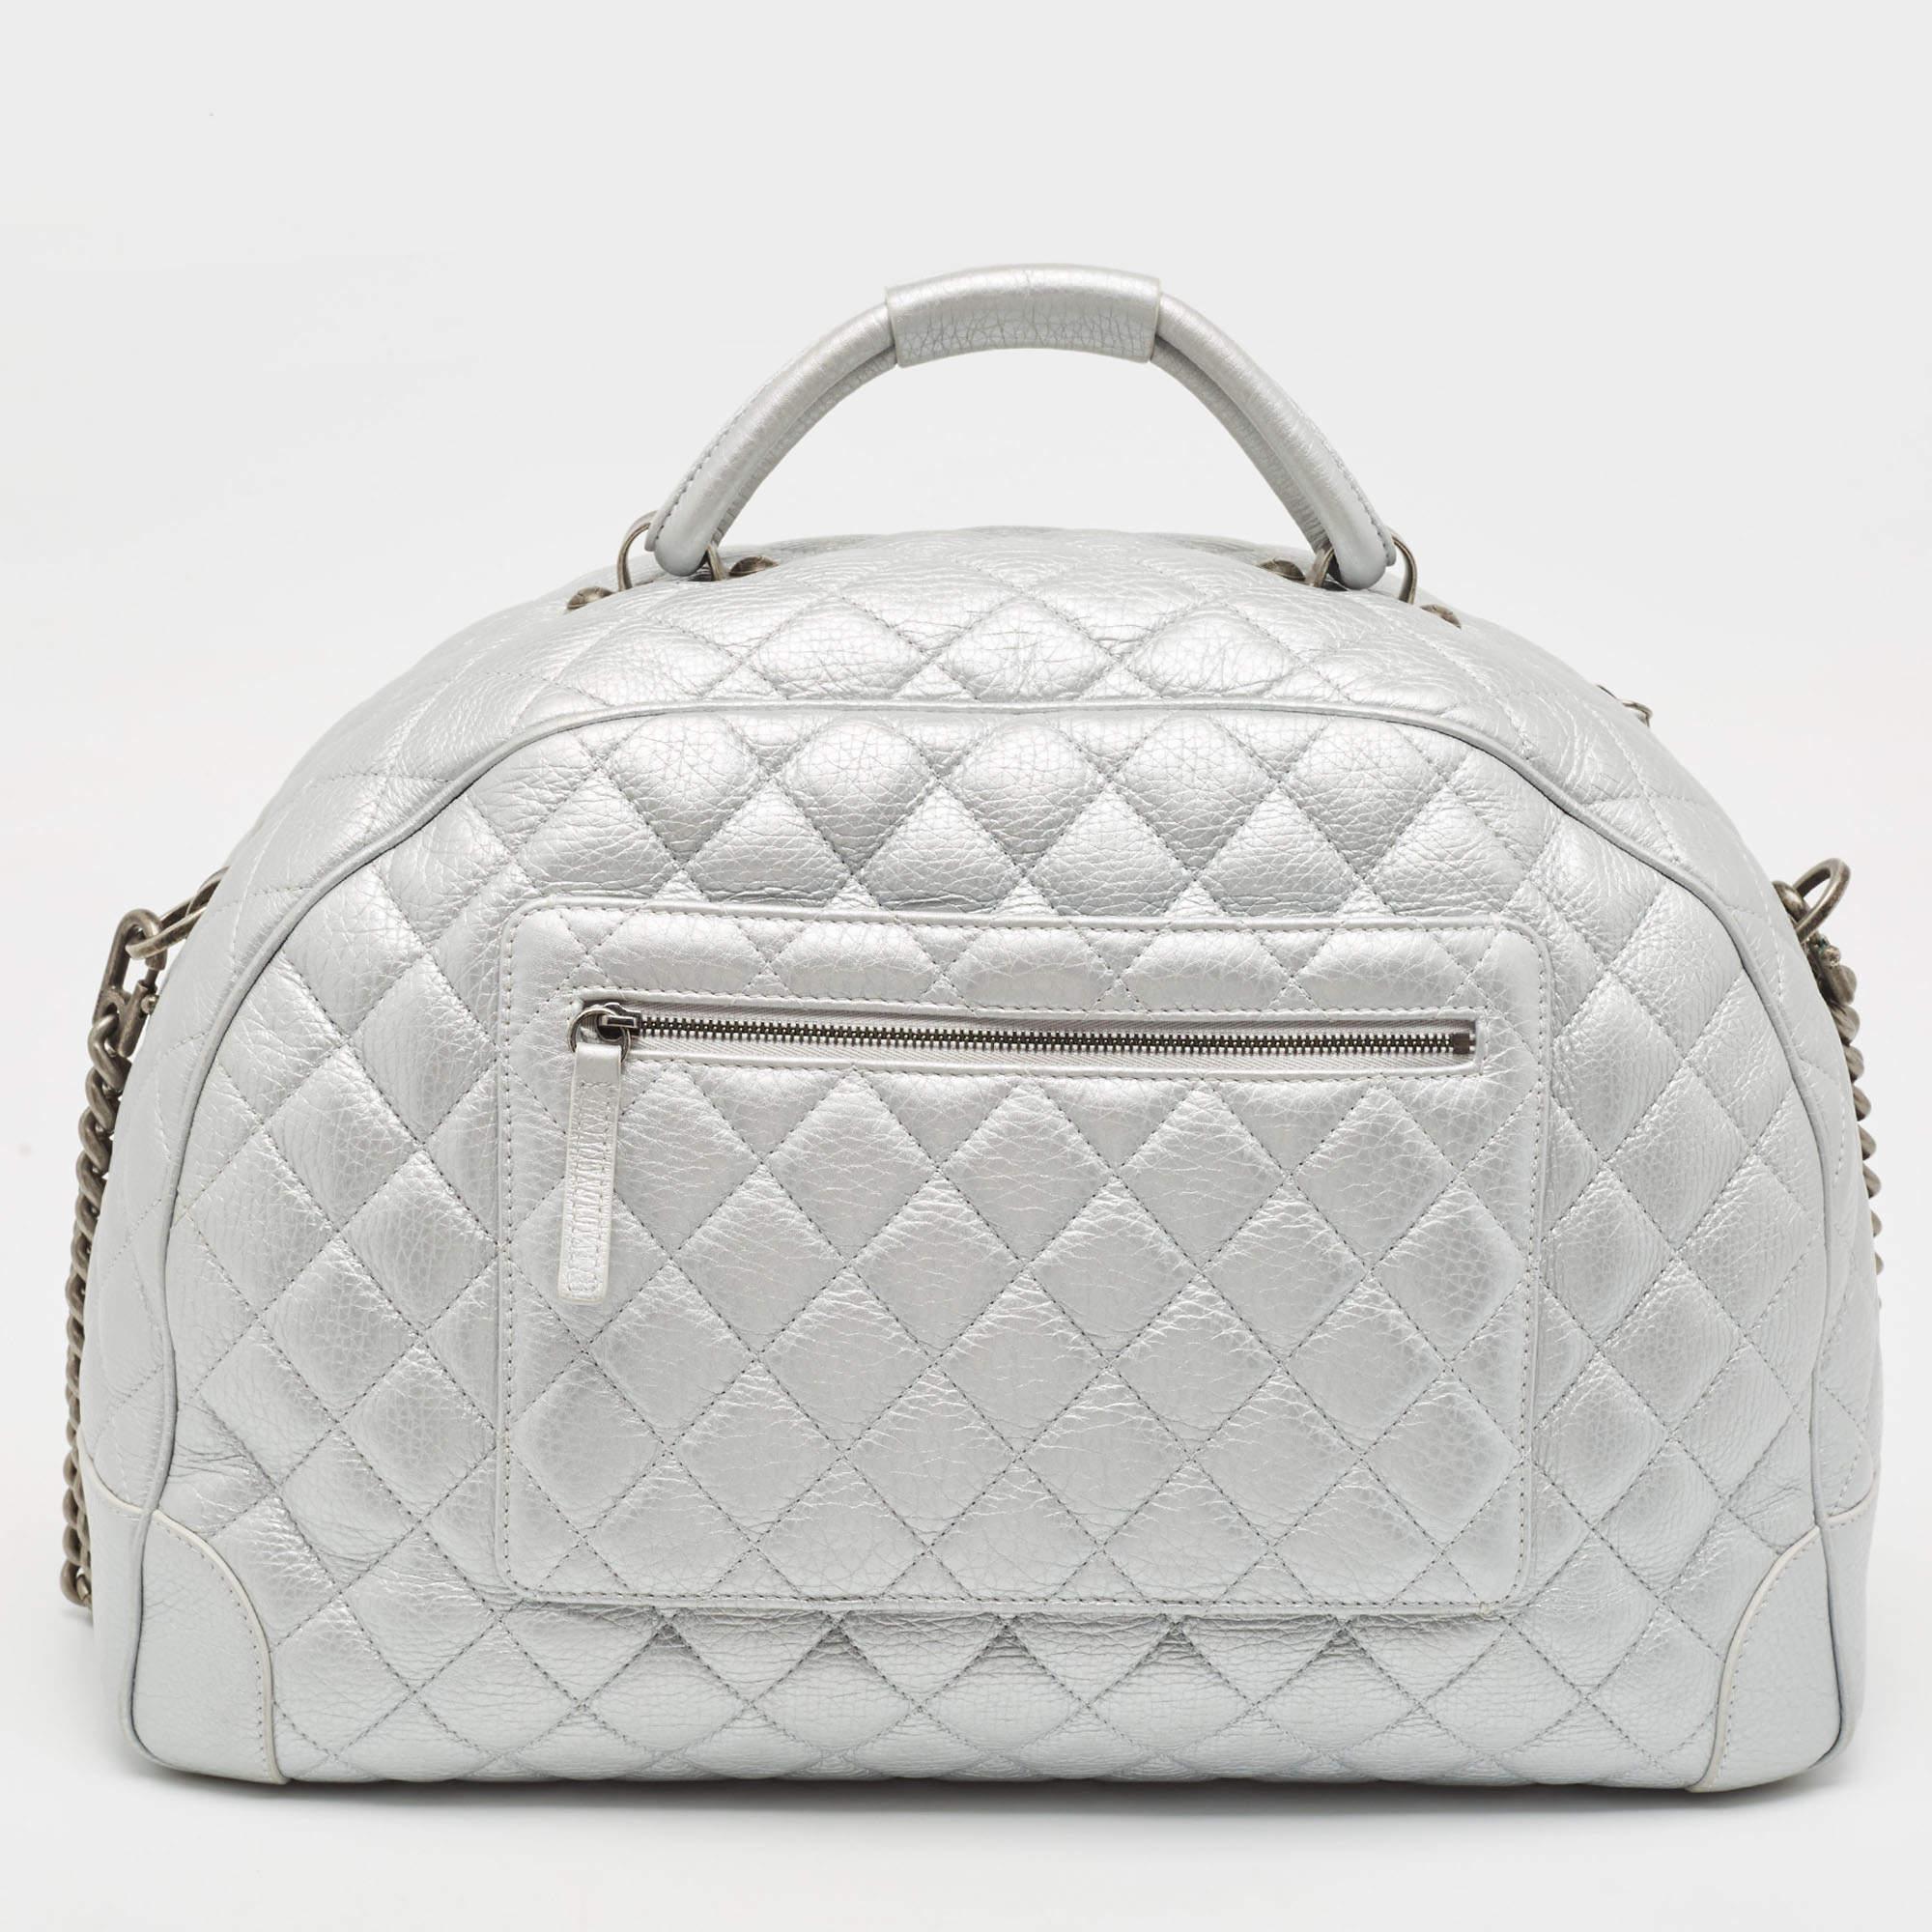 With flawless craftsmanship, immense style quotient, and an air of elegance, this Chanel bag has it all! Stitched to perfection, the handbag is made using only prime-quality materials so that it lasts you forever. With signature elements displayed